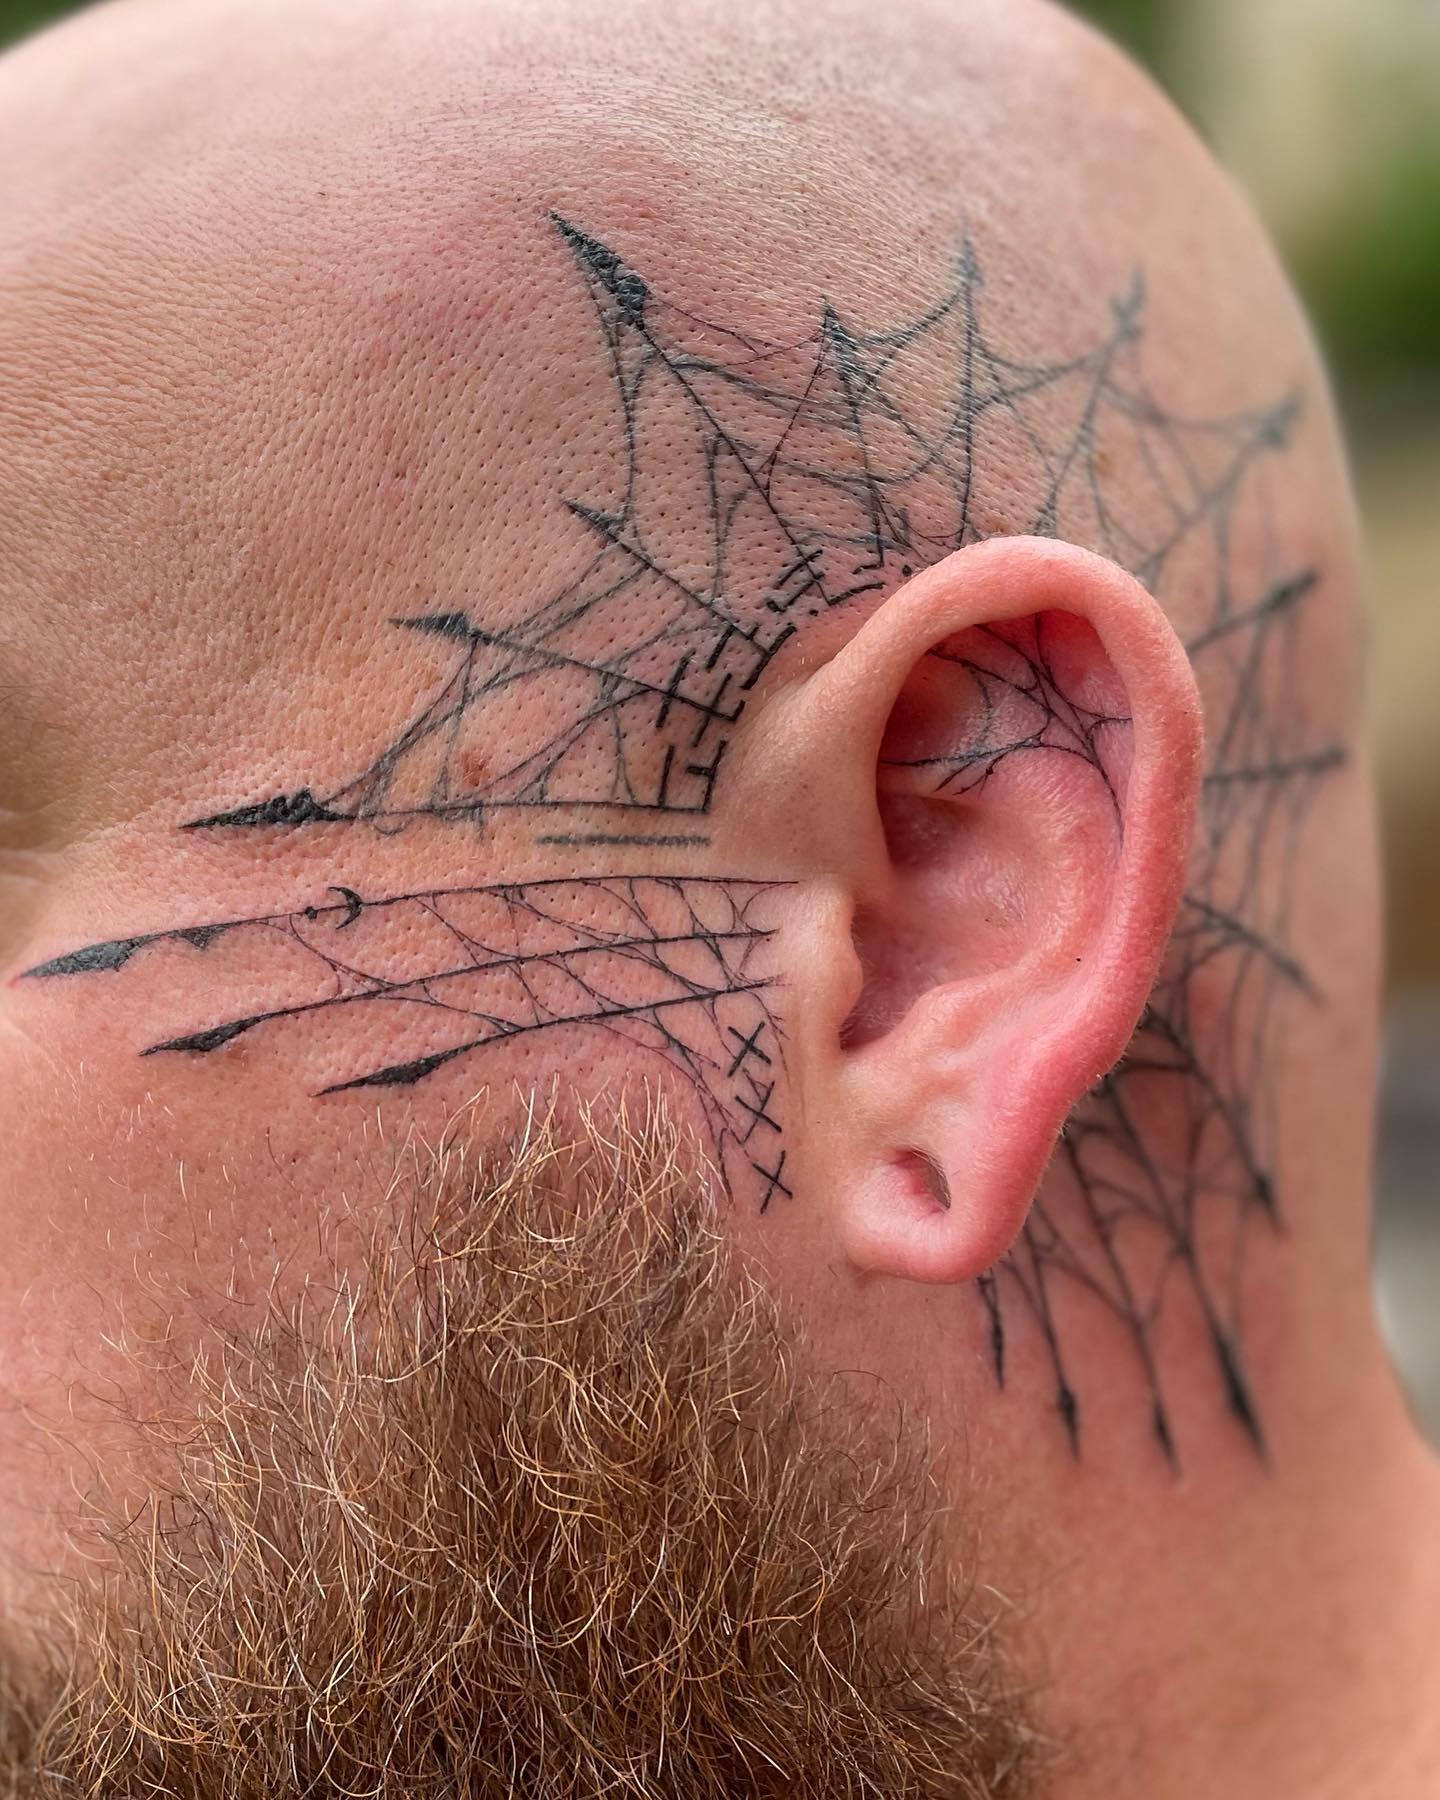 Not a lot of guys dare to try out a head tattoo. Do you? If so, give it a go with this marvelous piece.